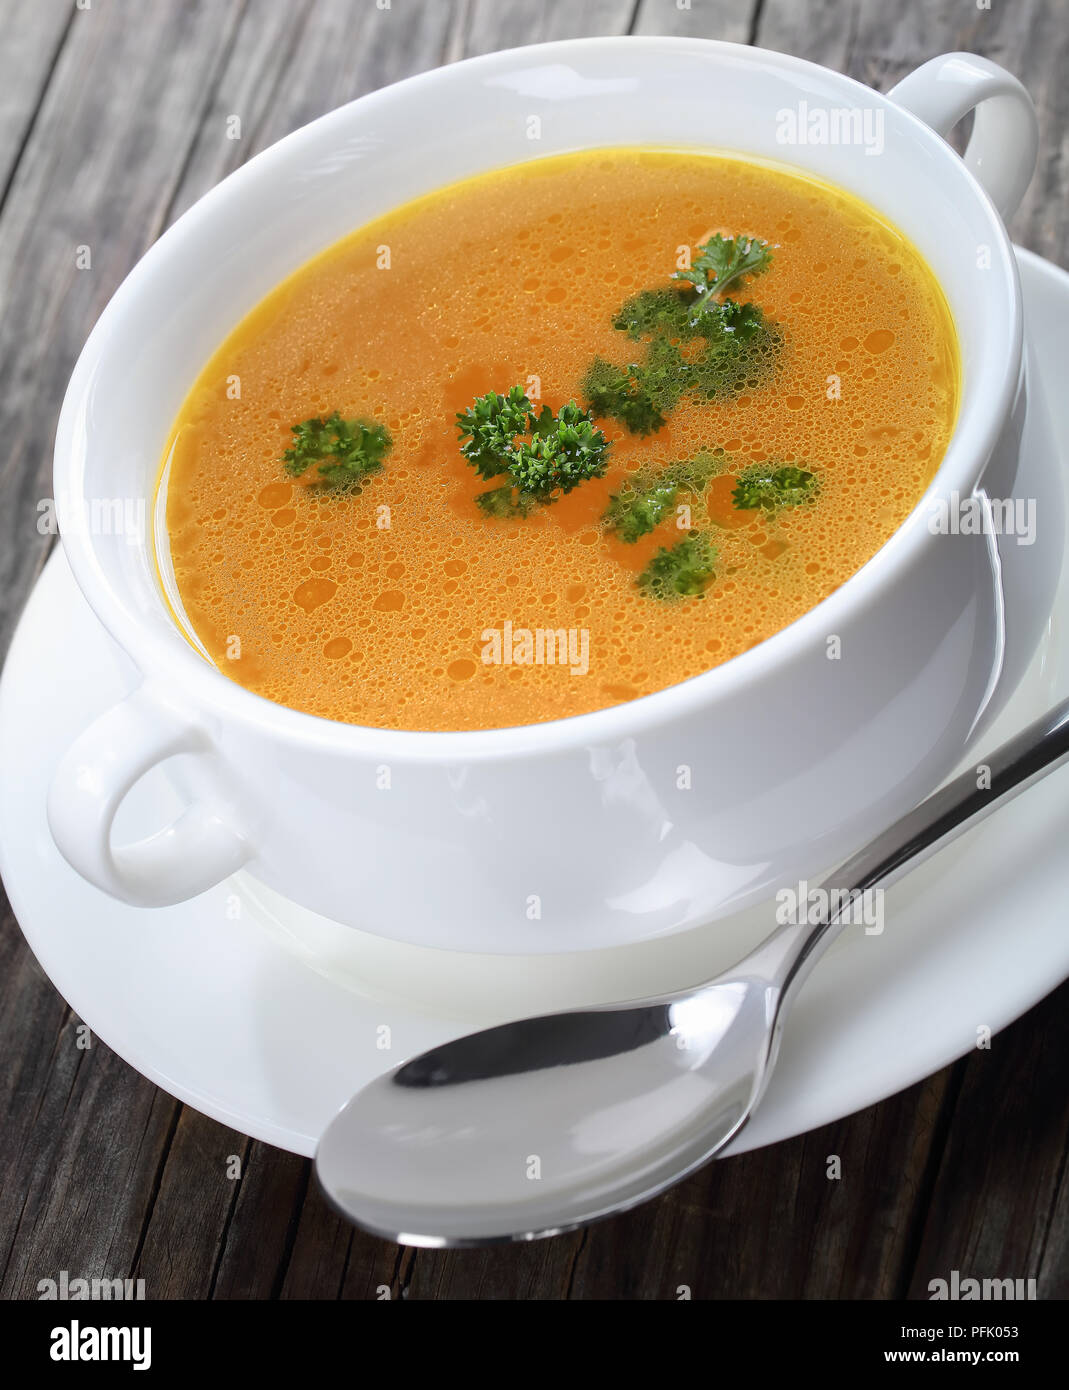 delicious Chicken broth with parsley in a white soup cup with spoon, view from above, close-up Stock Photo